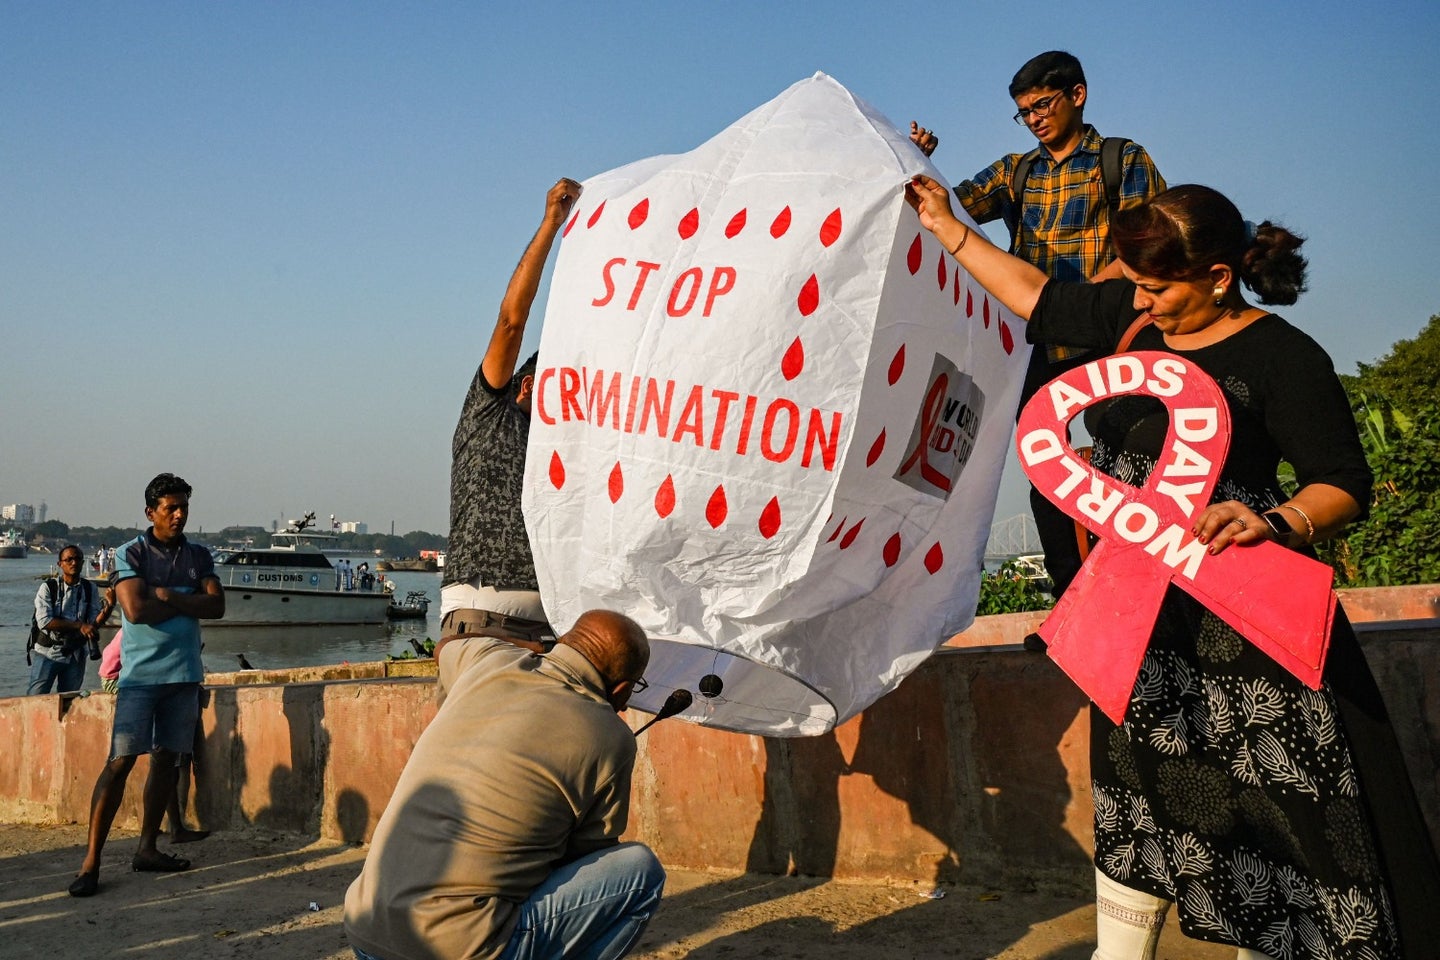 HIV/AIDS activists in India holding up "no discrimination" signs and red AIDS ribbons